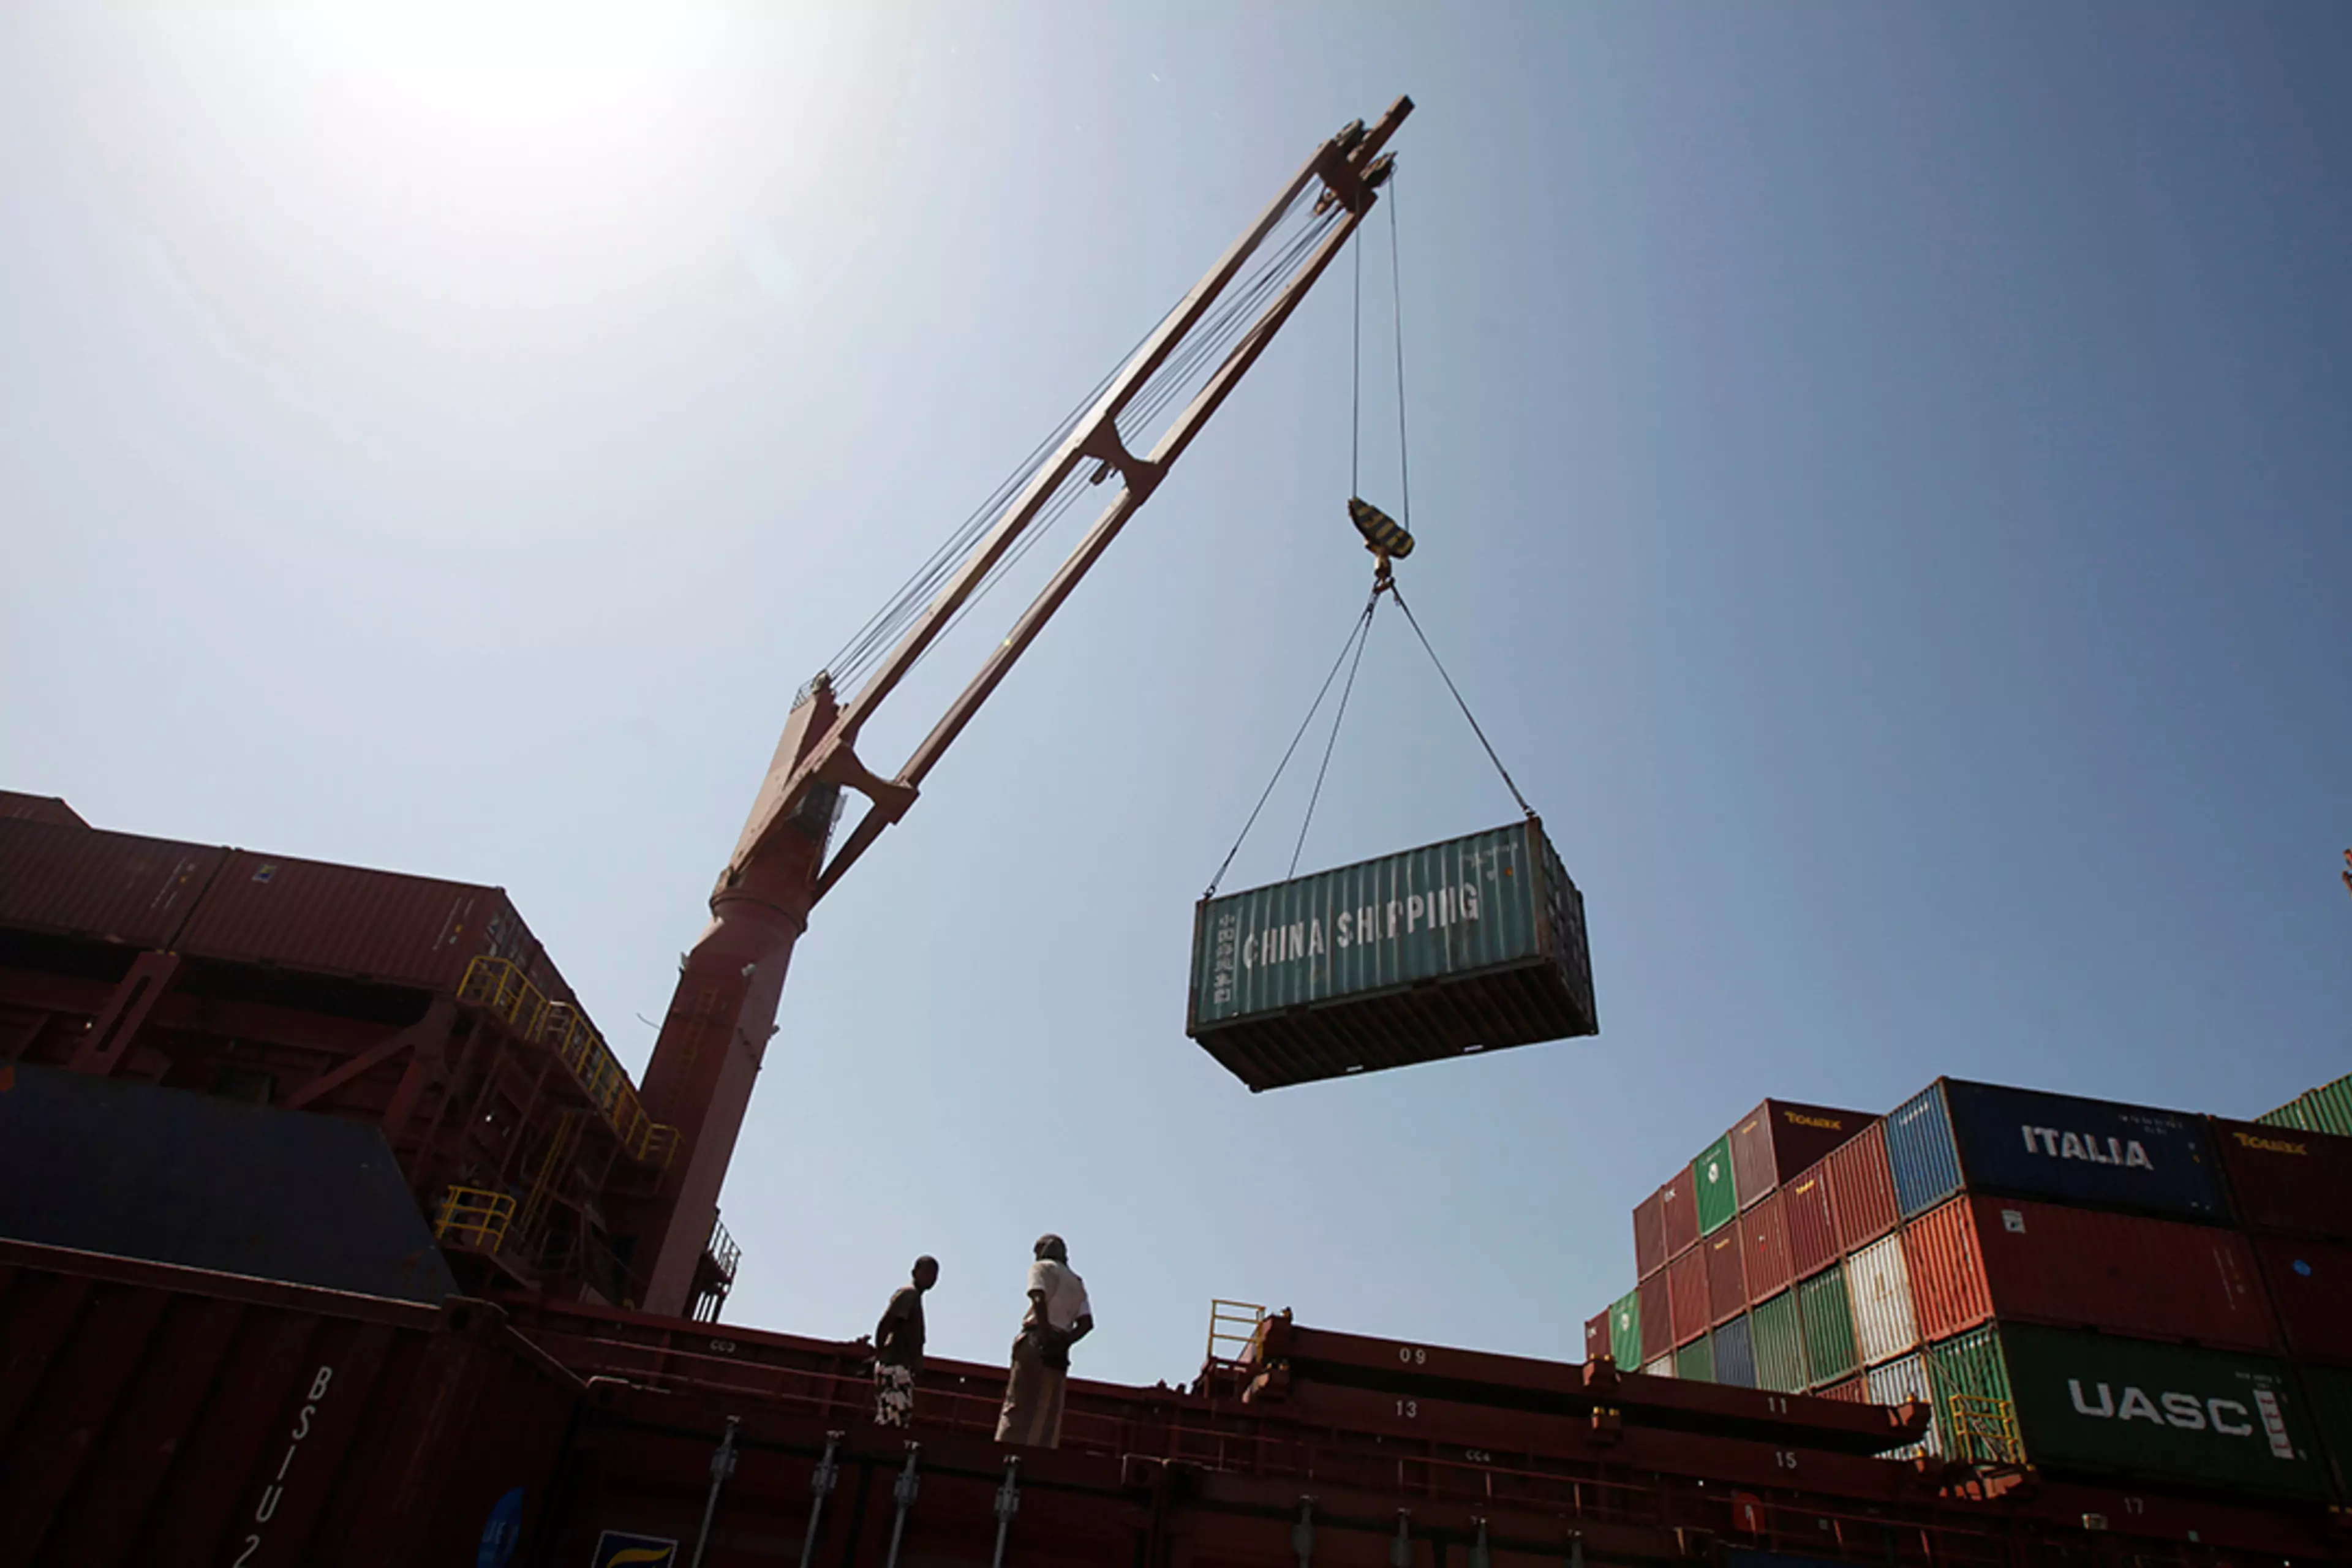 Workers use a crane to unload shipping containers at a port in Yemen.